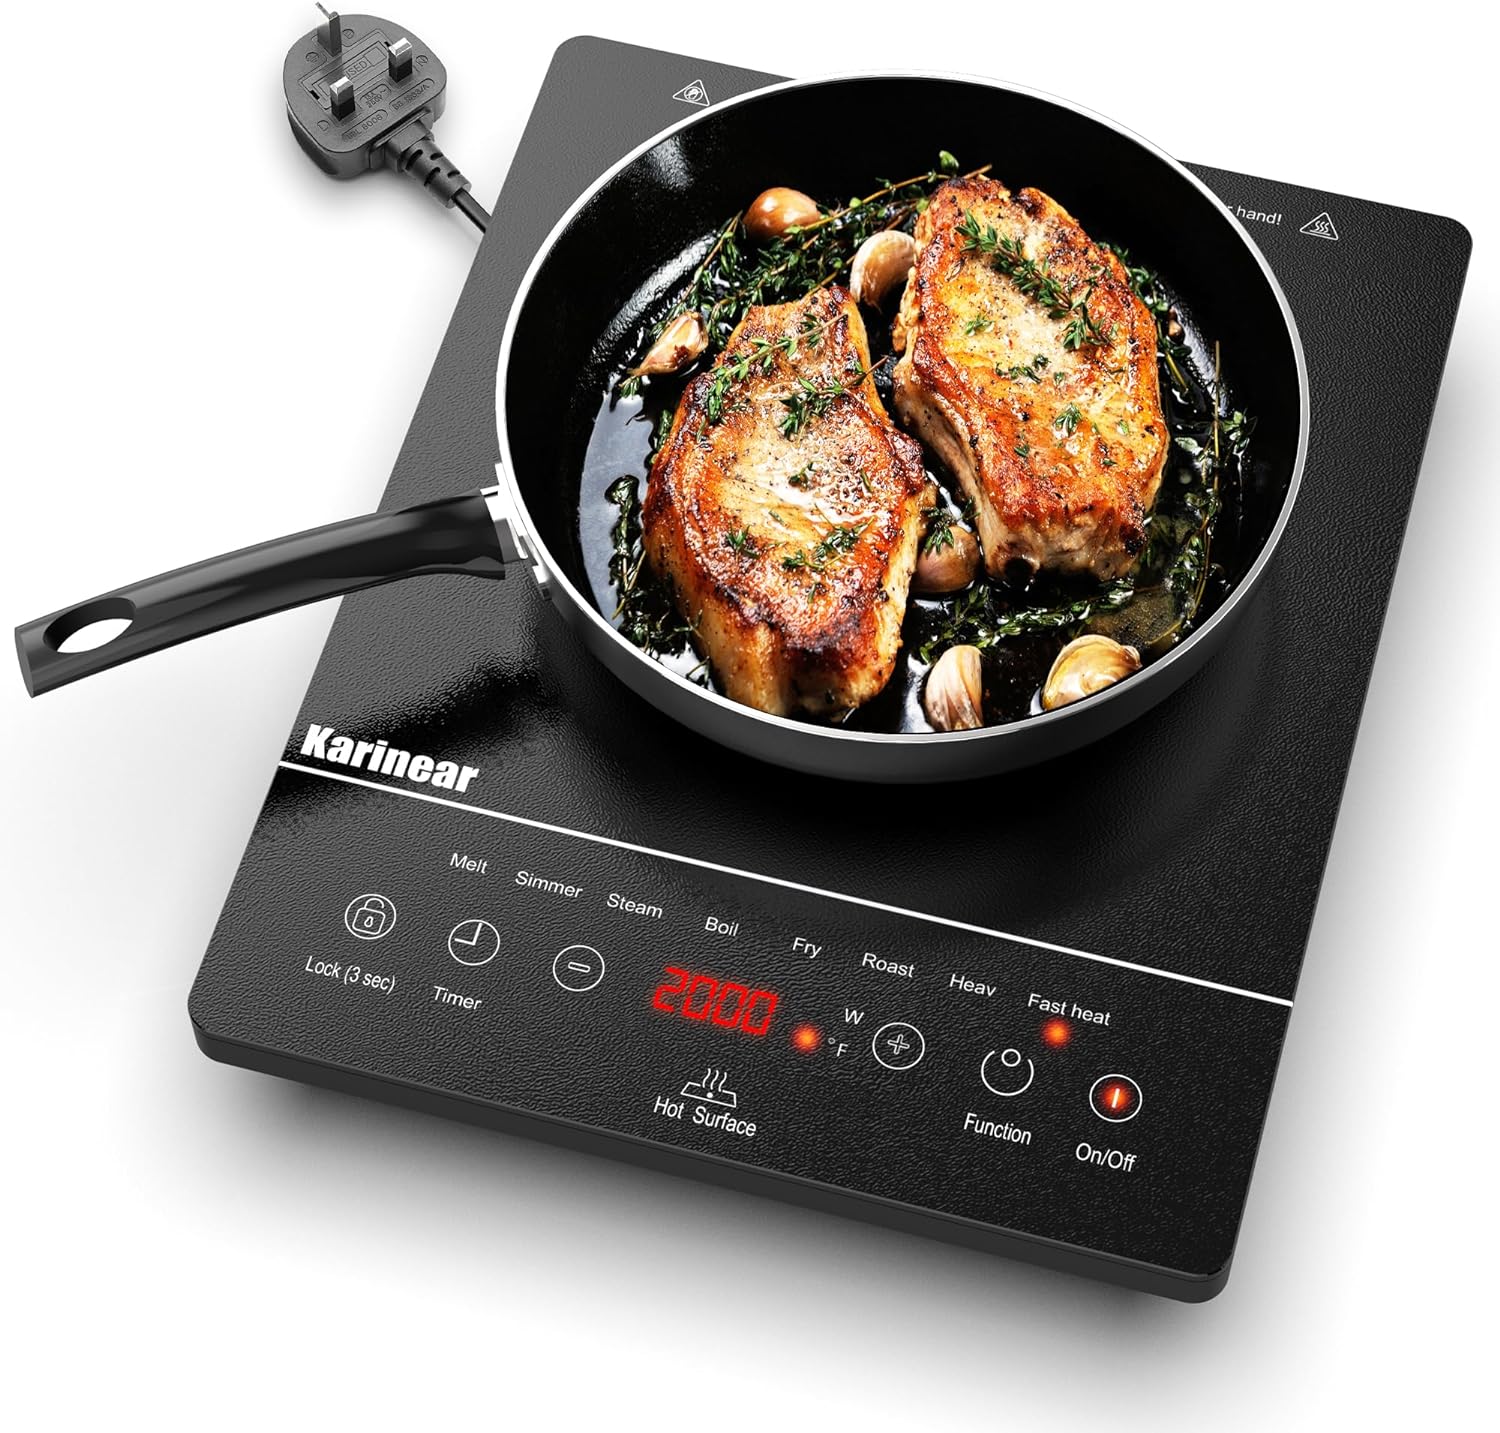 Karinear 12 Inch 2 Burners Marble Patterned Portable Electric Ceramic  Cooktop